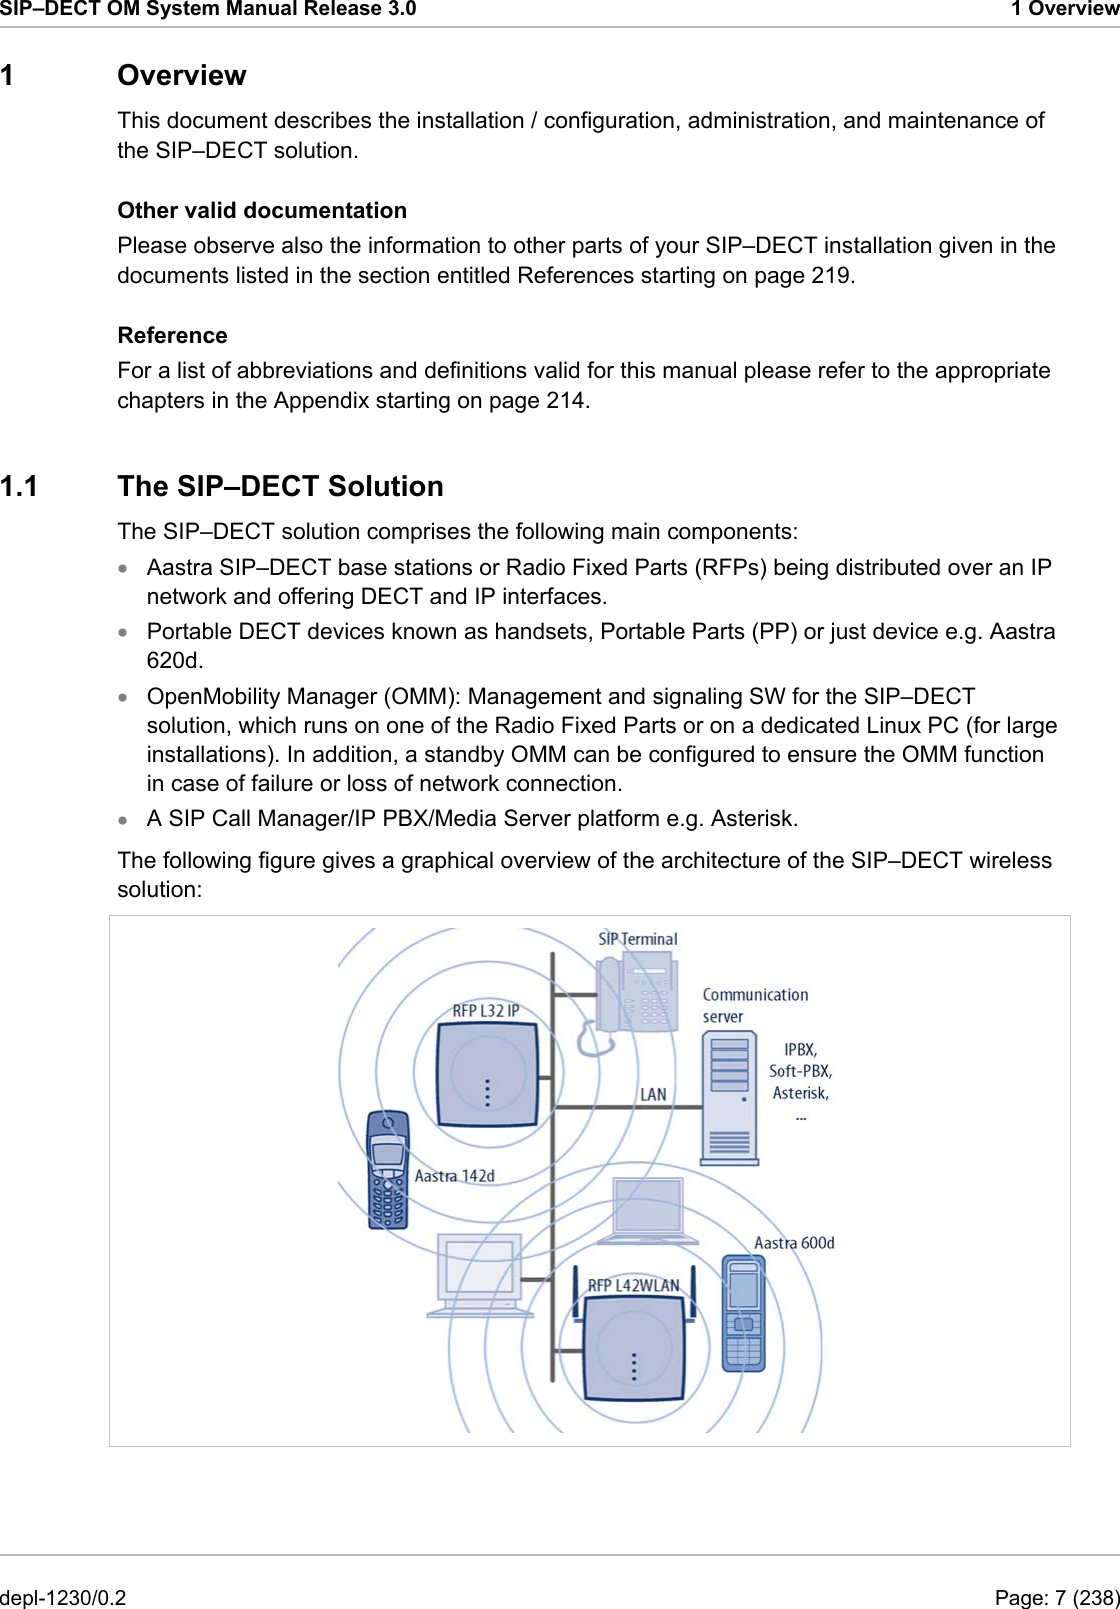 SIP–DECT OM System Manual Release 3.0  1 Overview 1 Overview This document describes the installation / configuration, administration, and maintenance of the SIP–DECT solution.  Other valid documentation Please observe also the information to other parts of your SIP–DECT installation given in the documents listed in the section entitled References starting on page 219. Reference For a list of abbreviations and definitions valid for this manual please refer to the appropriate chapters in the Appendix starting on page 214. 1.1 The SIP–DECT Solution The SIP–DECT solution comprises the following main components:  Aastra SIP–DECT base stations or Radio Fixed Parts (RFPs) being distributed over an IP network and offering DECT and IP interfaces.  • • • • Portable DECT devices known as handsets, Portable Parts (PP) or just device e.g. Aastra 620d. OpenMobility Manager (OMM): Management and signaling SW for the SIP–DECT solution, which runs on one of the Radio Fixed Parts or on a dedicated Linux PC (for large installations). In addition, a standby OMM can be configured to ensure the OMM function in case of failure or loss of network connection.  A SIP Call Manager/IP PBX/Media Server platform e.g. Asterisk.  The following figure gives a graphical overview of the architecture of the SIP–DECT wireless solution:   depl-1230/0.2  Page: 7 (238) 